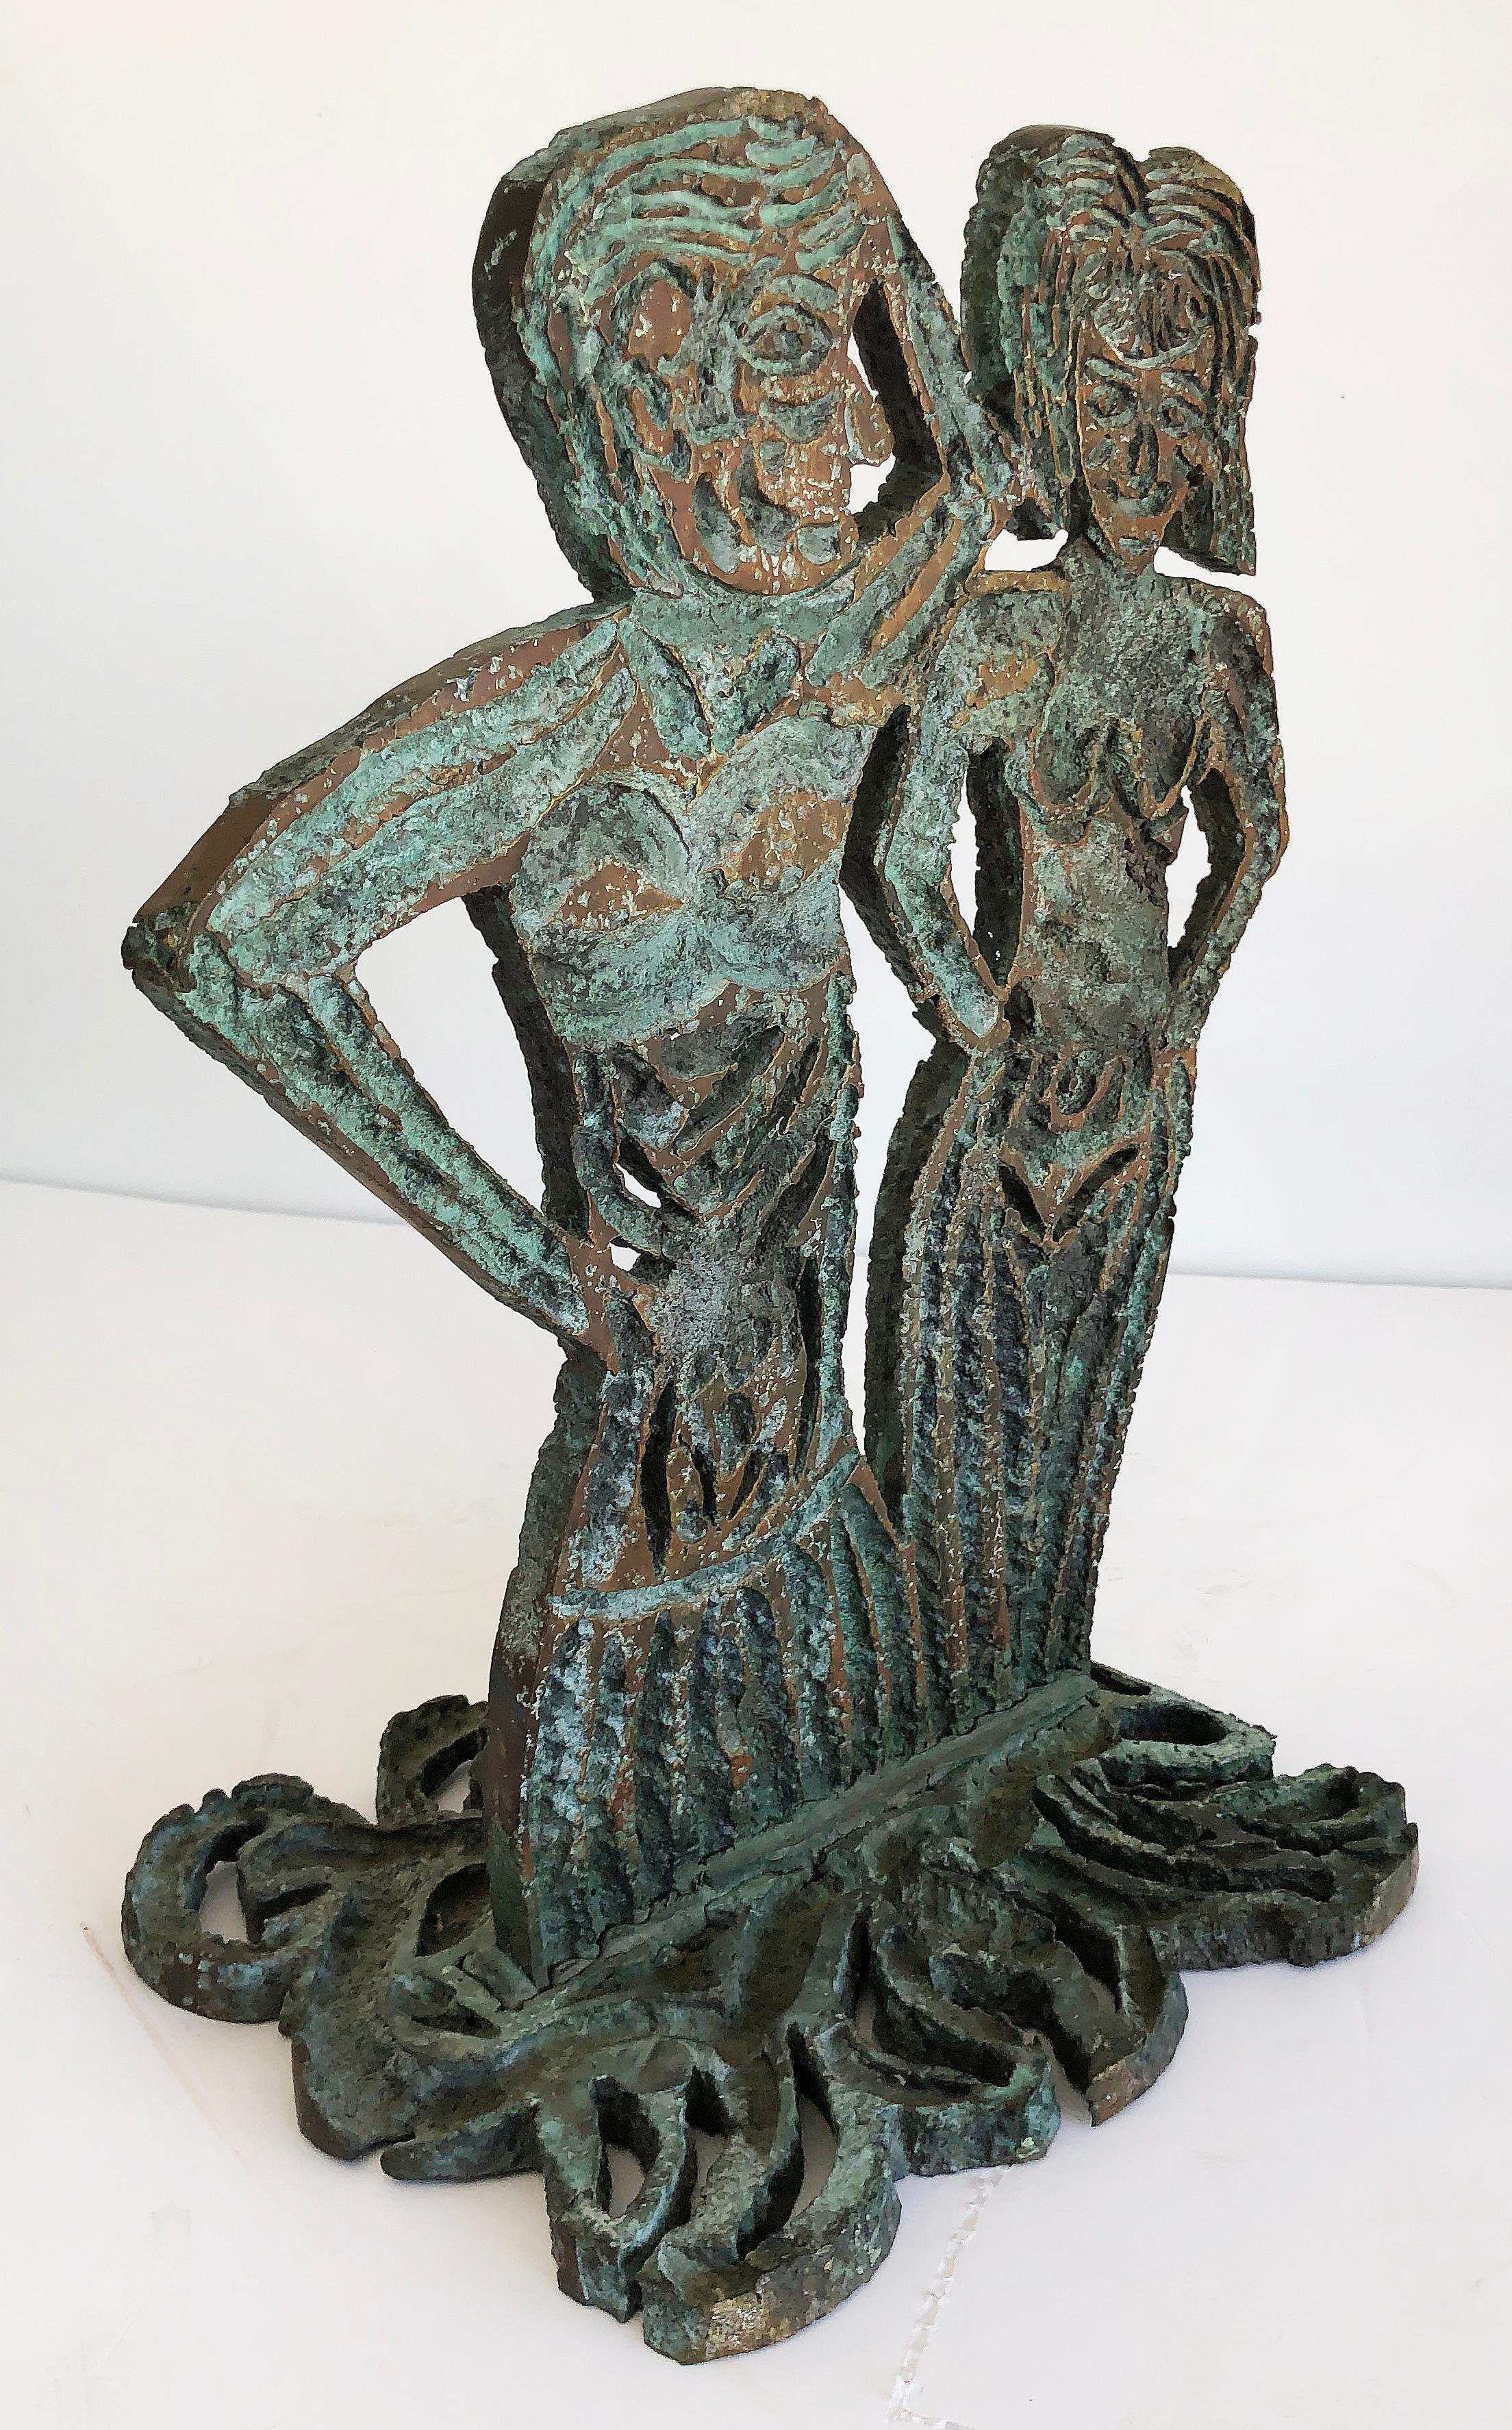 Brutalist bronze figurative sculpture by Davis David, 1993

Offered is an abstract Brutalist Postmodern figurative bronze sculpture. The bronze sculpture depicts two abstract figures of a man and a woman. The piece is signed on the bottom DAVIS